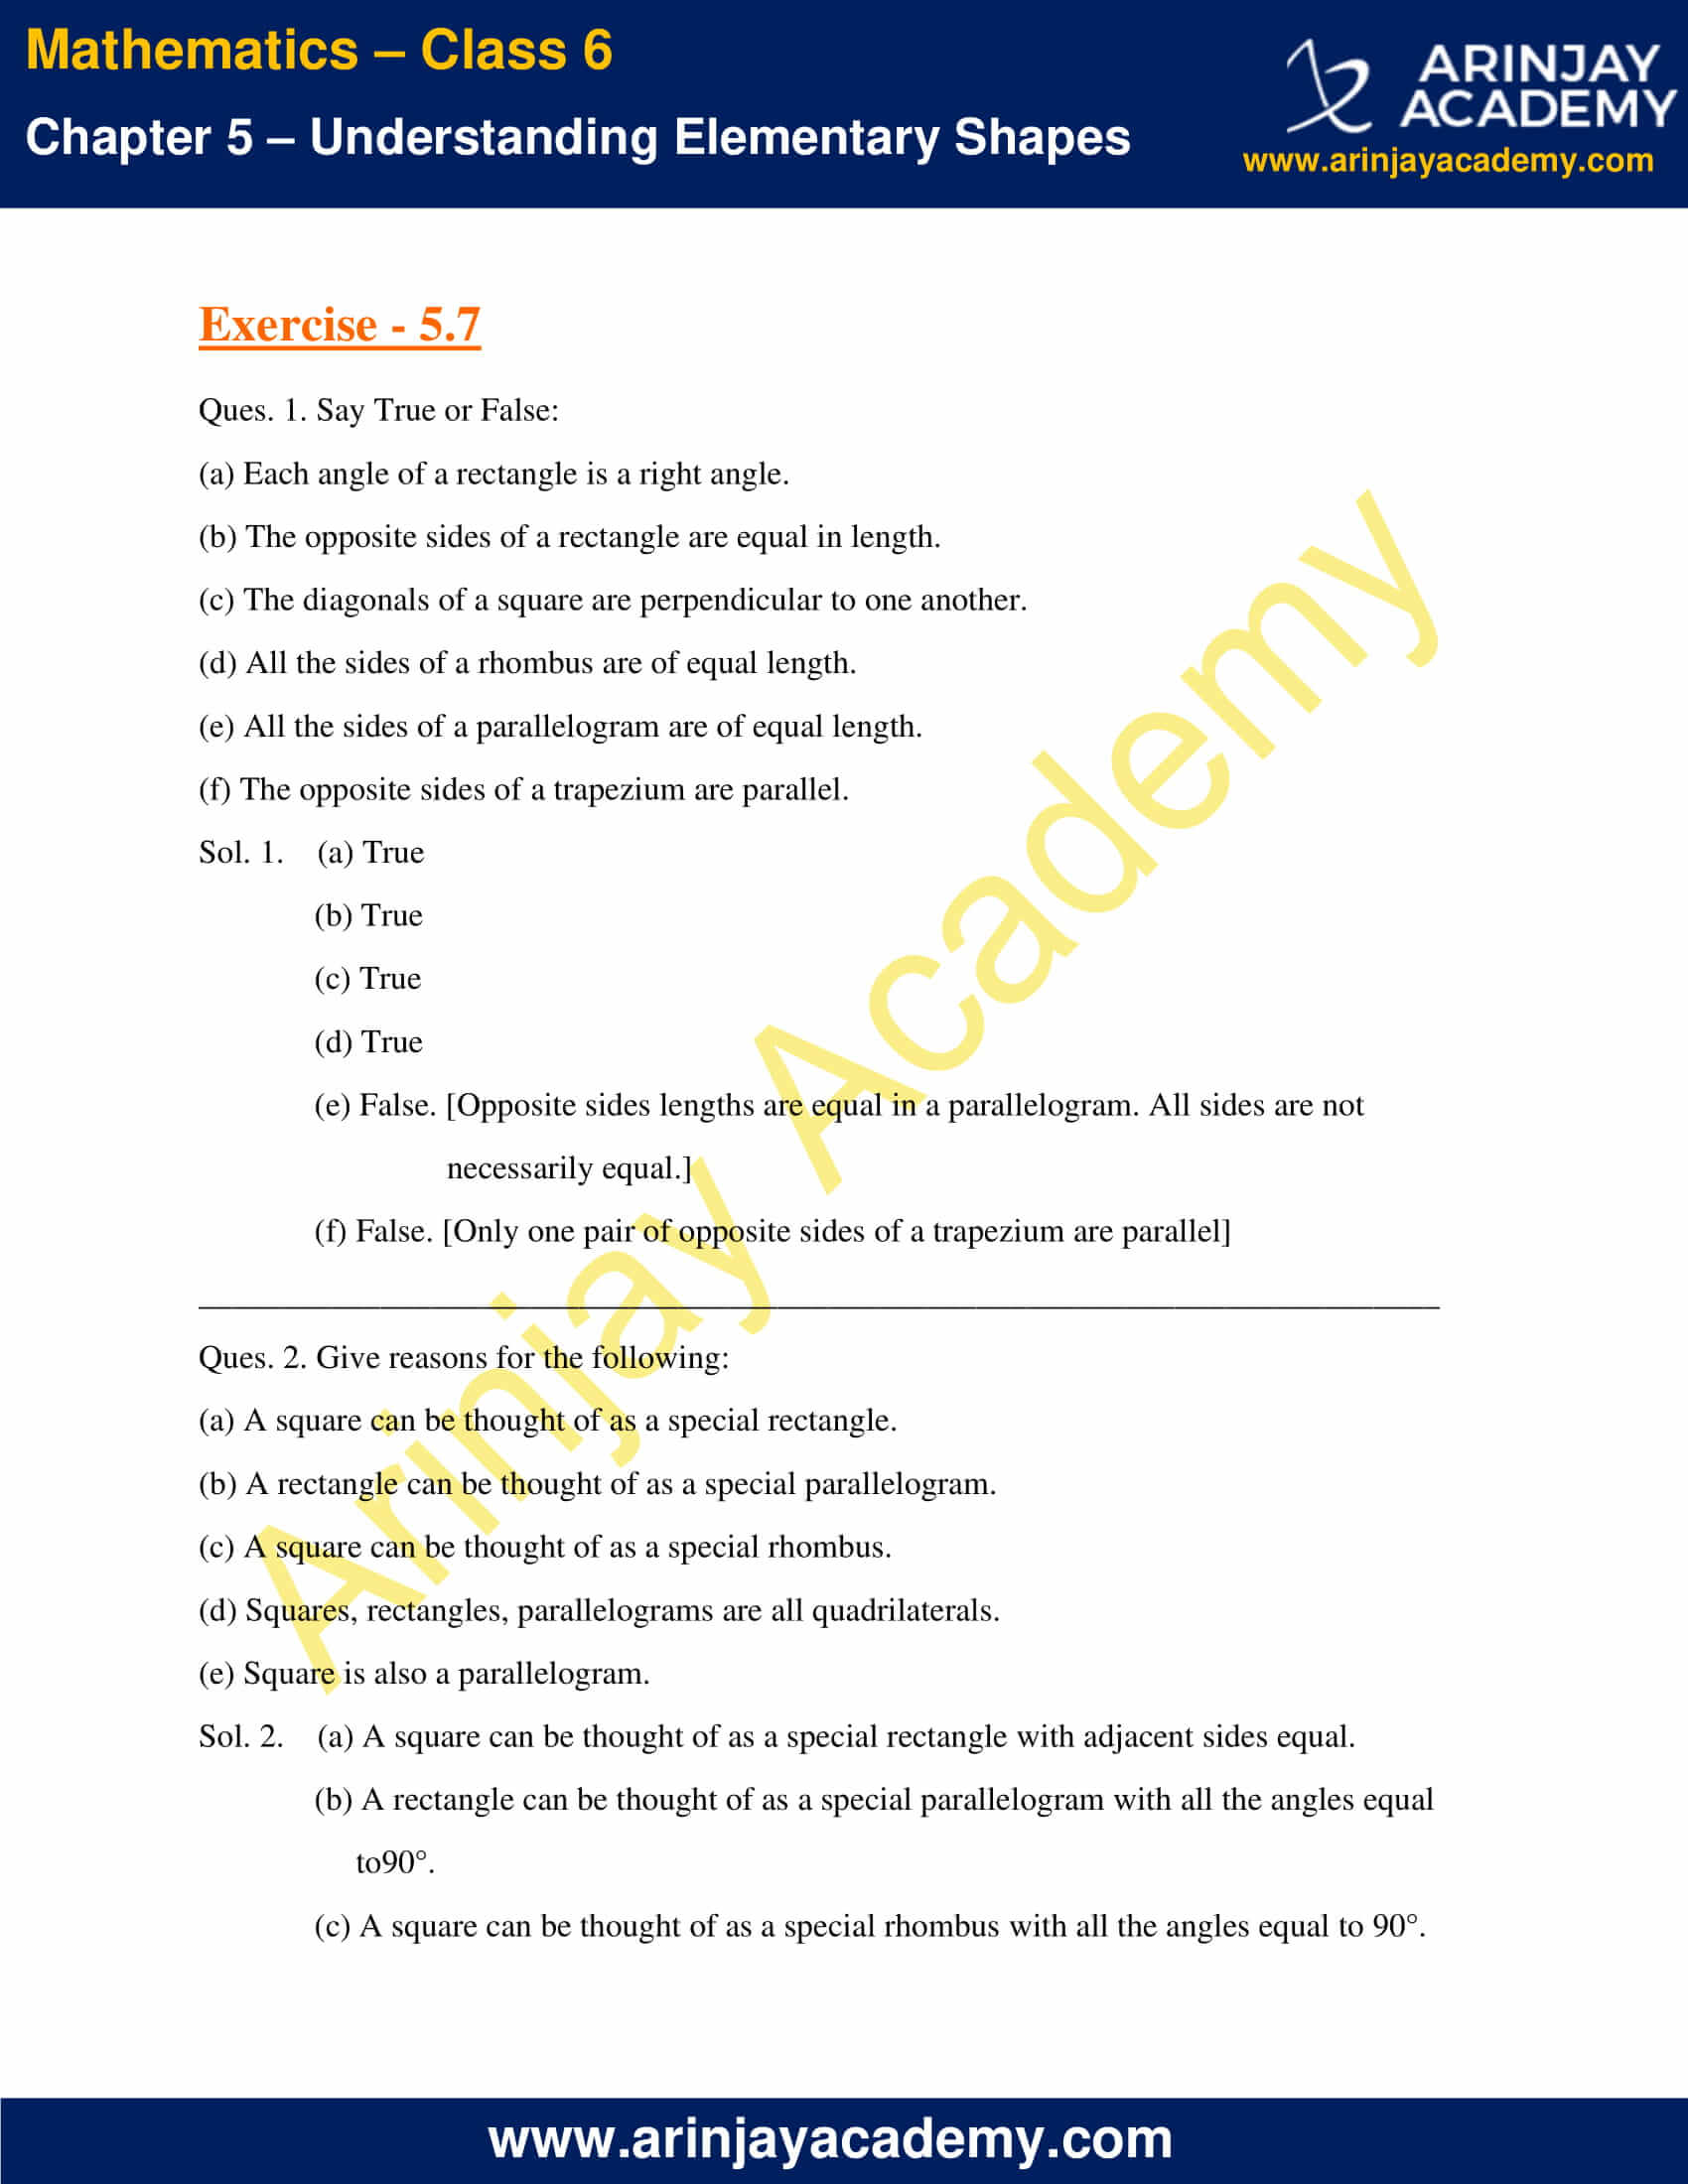 NCERT Solutions for Class 6 Maths Chapter 5 Exercise 5.7 image 1